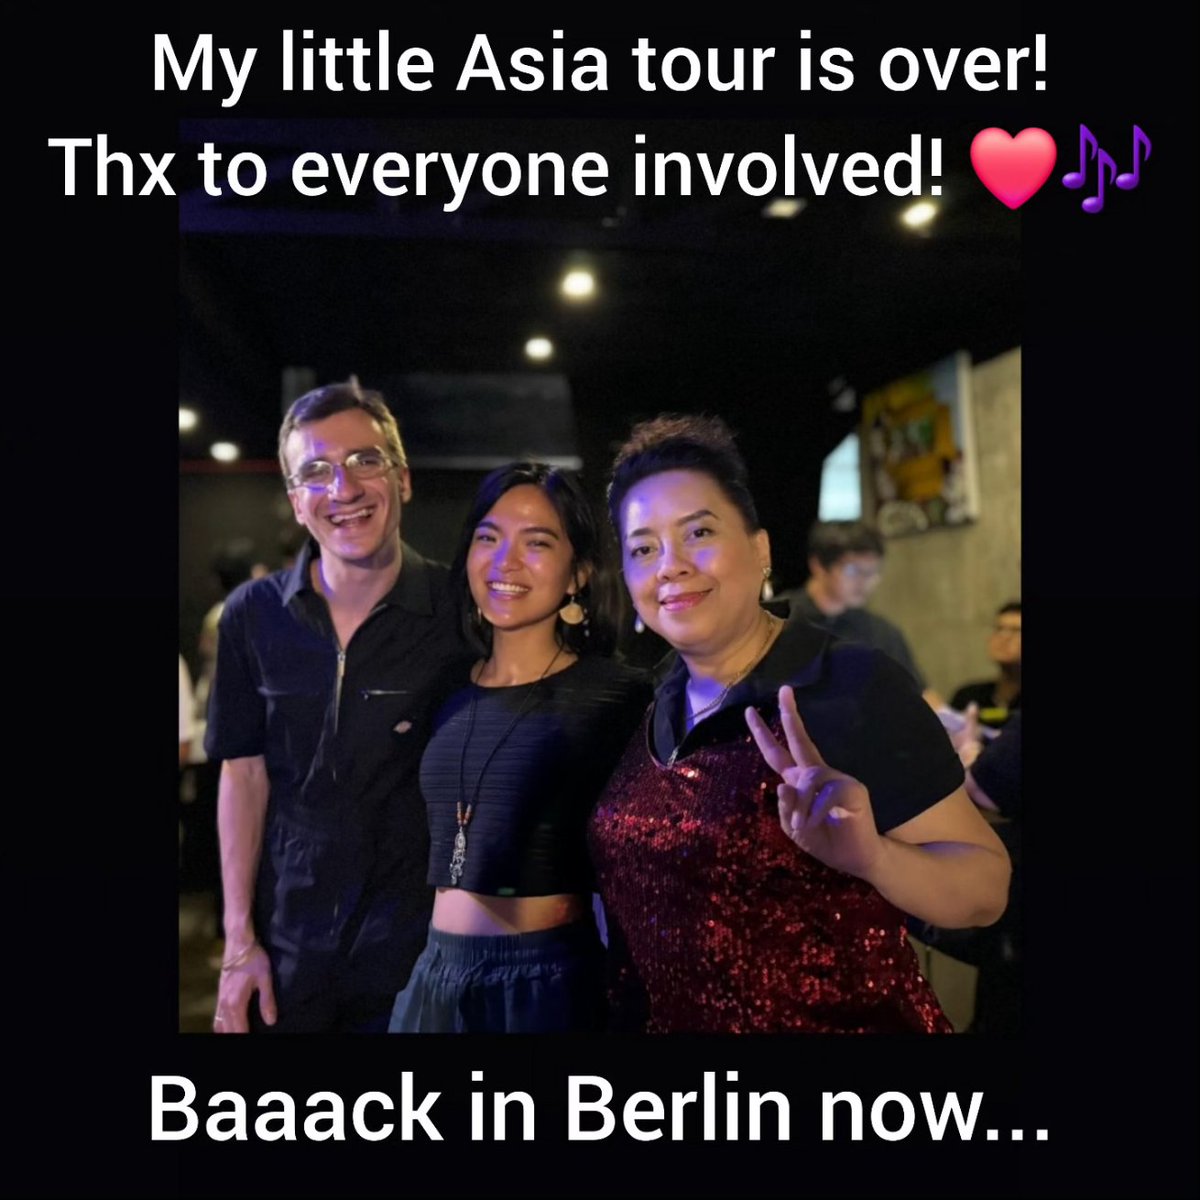 What a lovely weekend at @tagojazz singing with the amazing Lorna Cifra and @jirehcalo ❤️🎶 Two weeks on tour in Taiwan, Japan and Philippines are over. Back to Berlin now to prepare for my record release tour. 

#singer #vocalist #jazzsinger #jazzvocalist #jazzmusician #tour